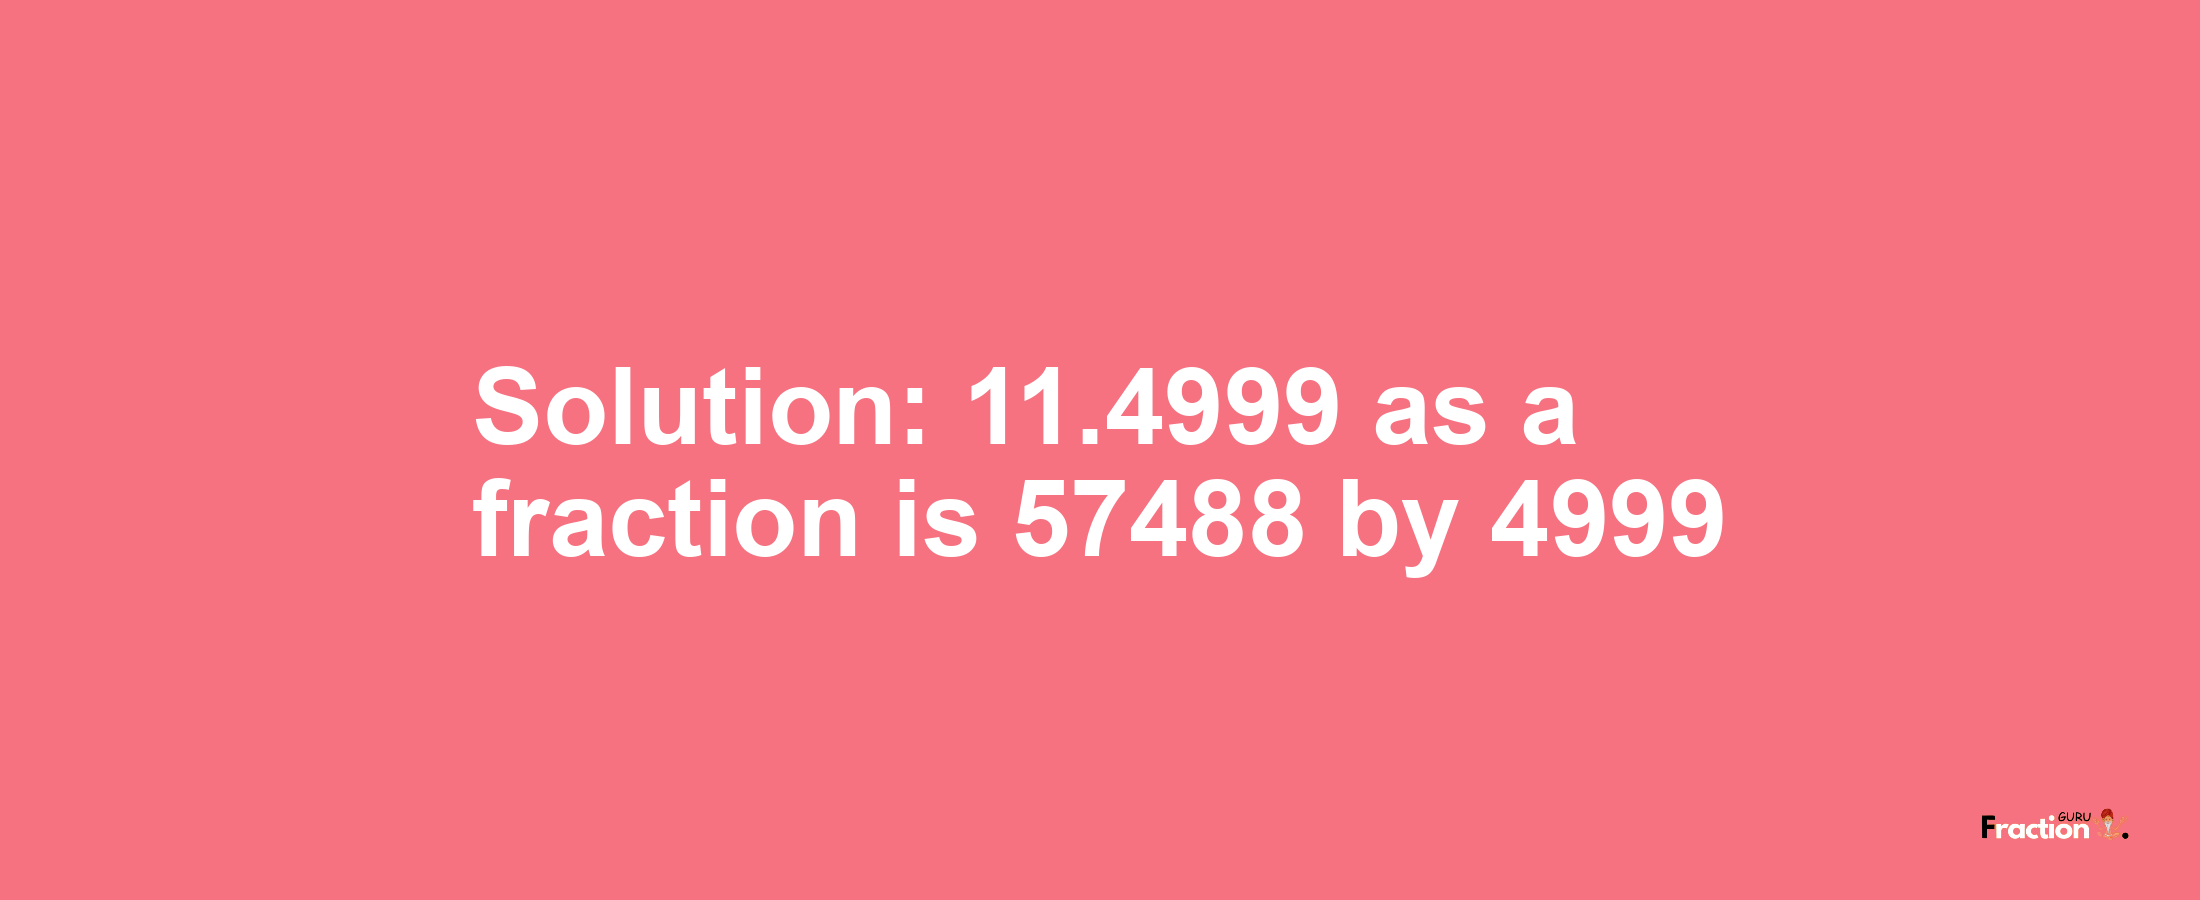 Solution:11.4999 as a fraction is 57488/4999